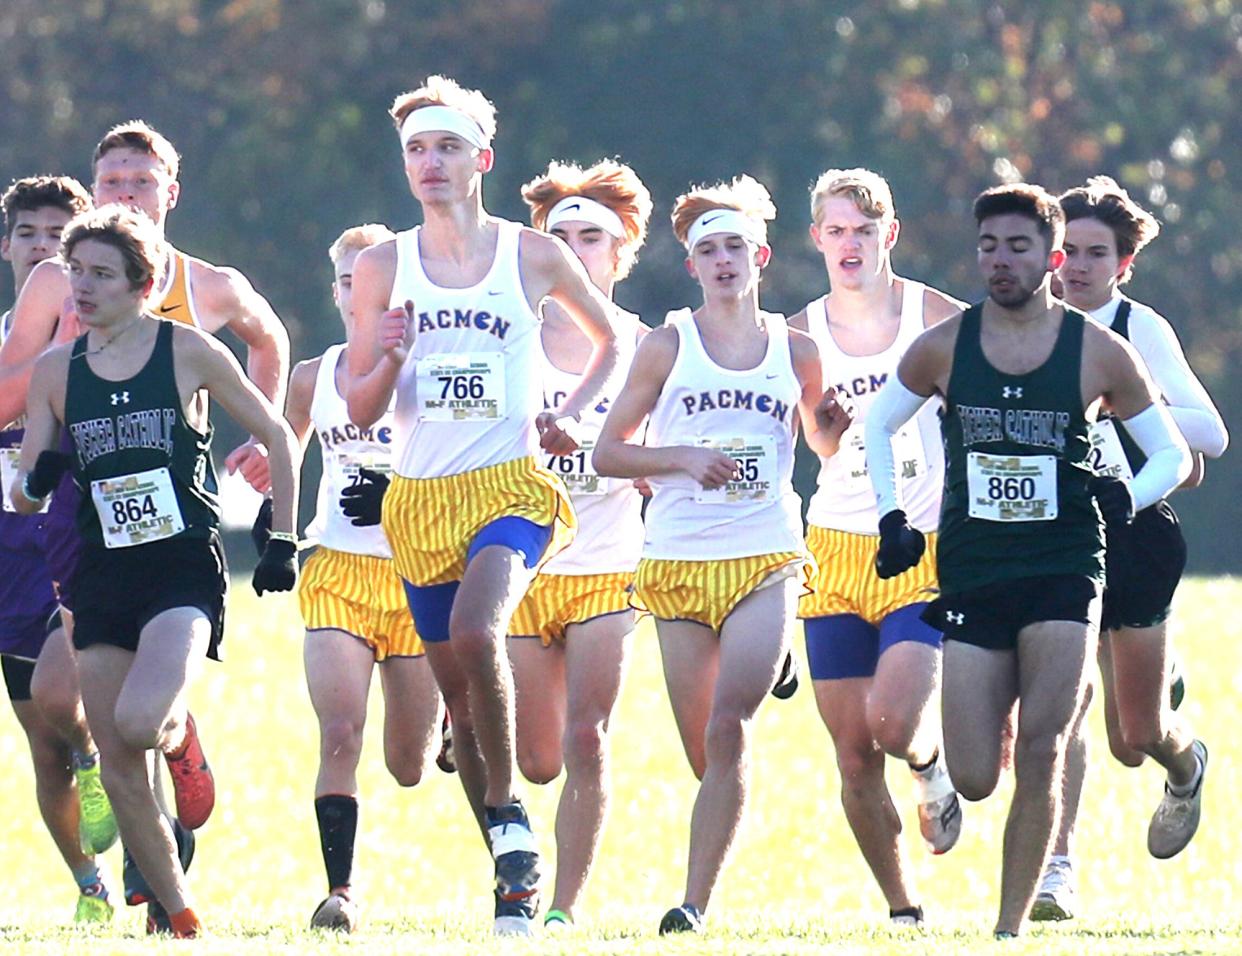 East Canton's Gabe Shilling leads the team at the start of the Div. III Boys Cross Country Championship at Fortress Obetz.